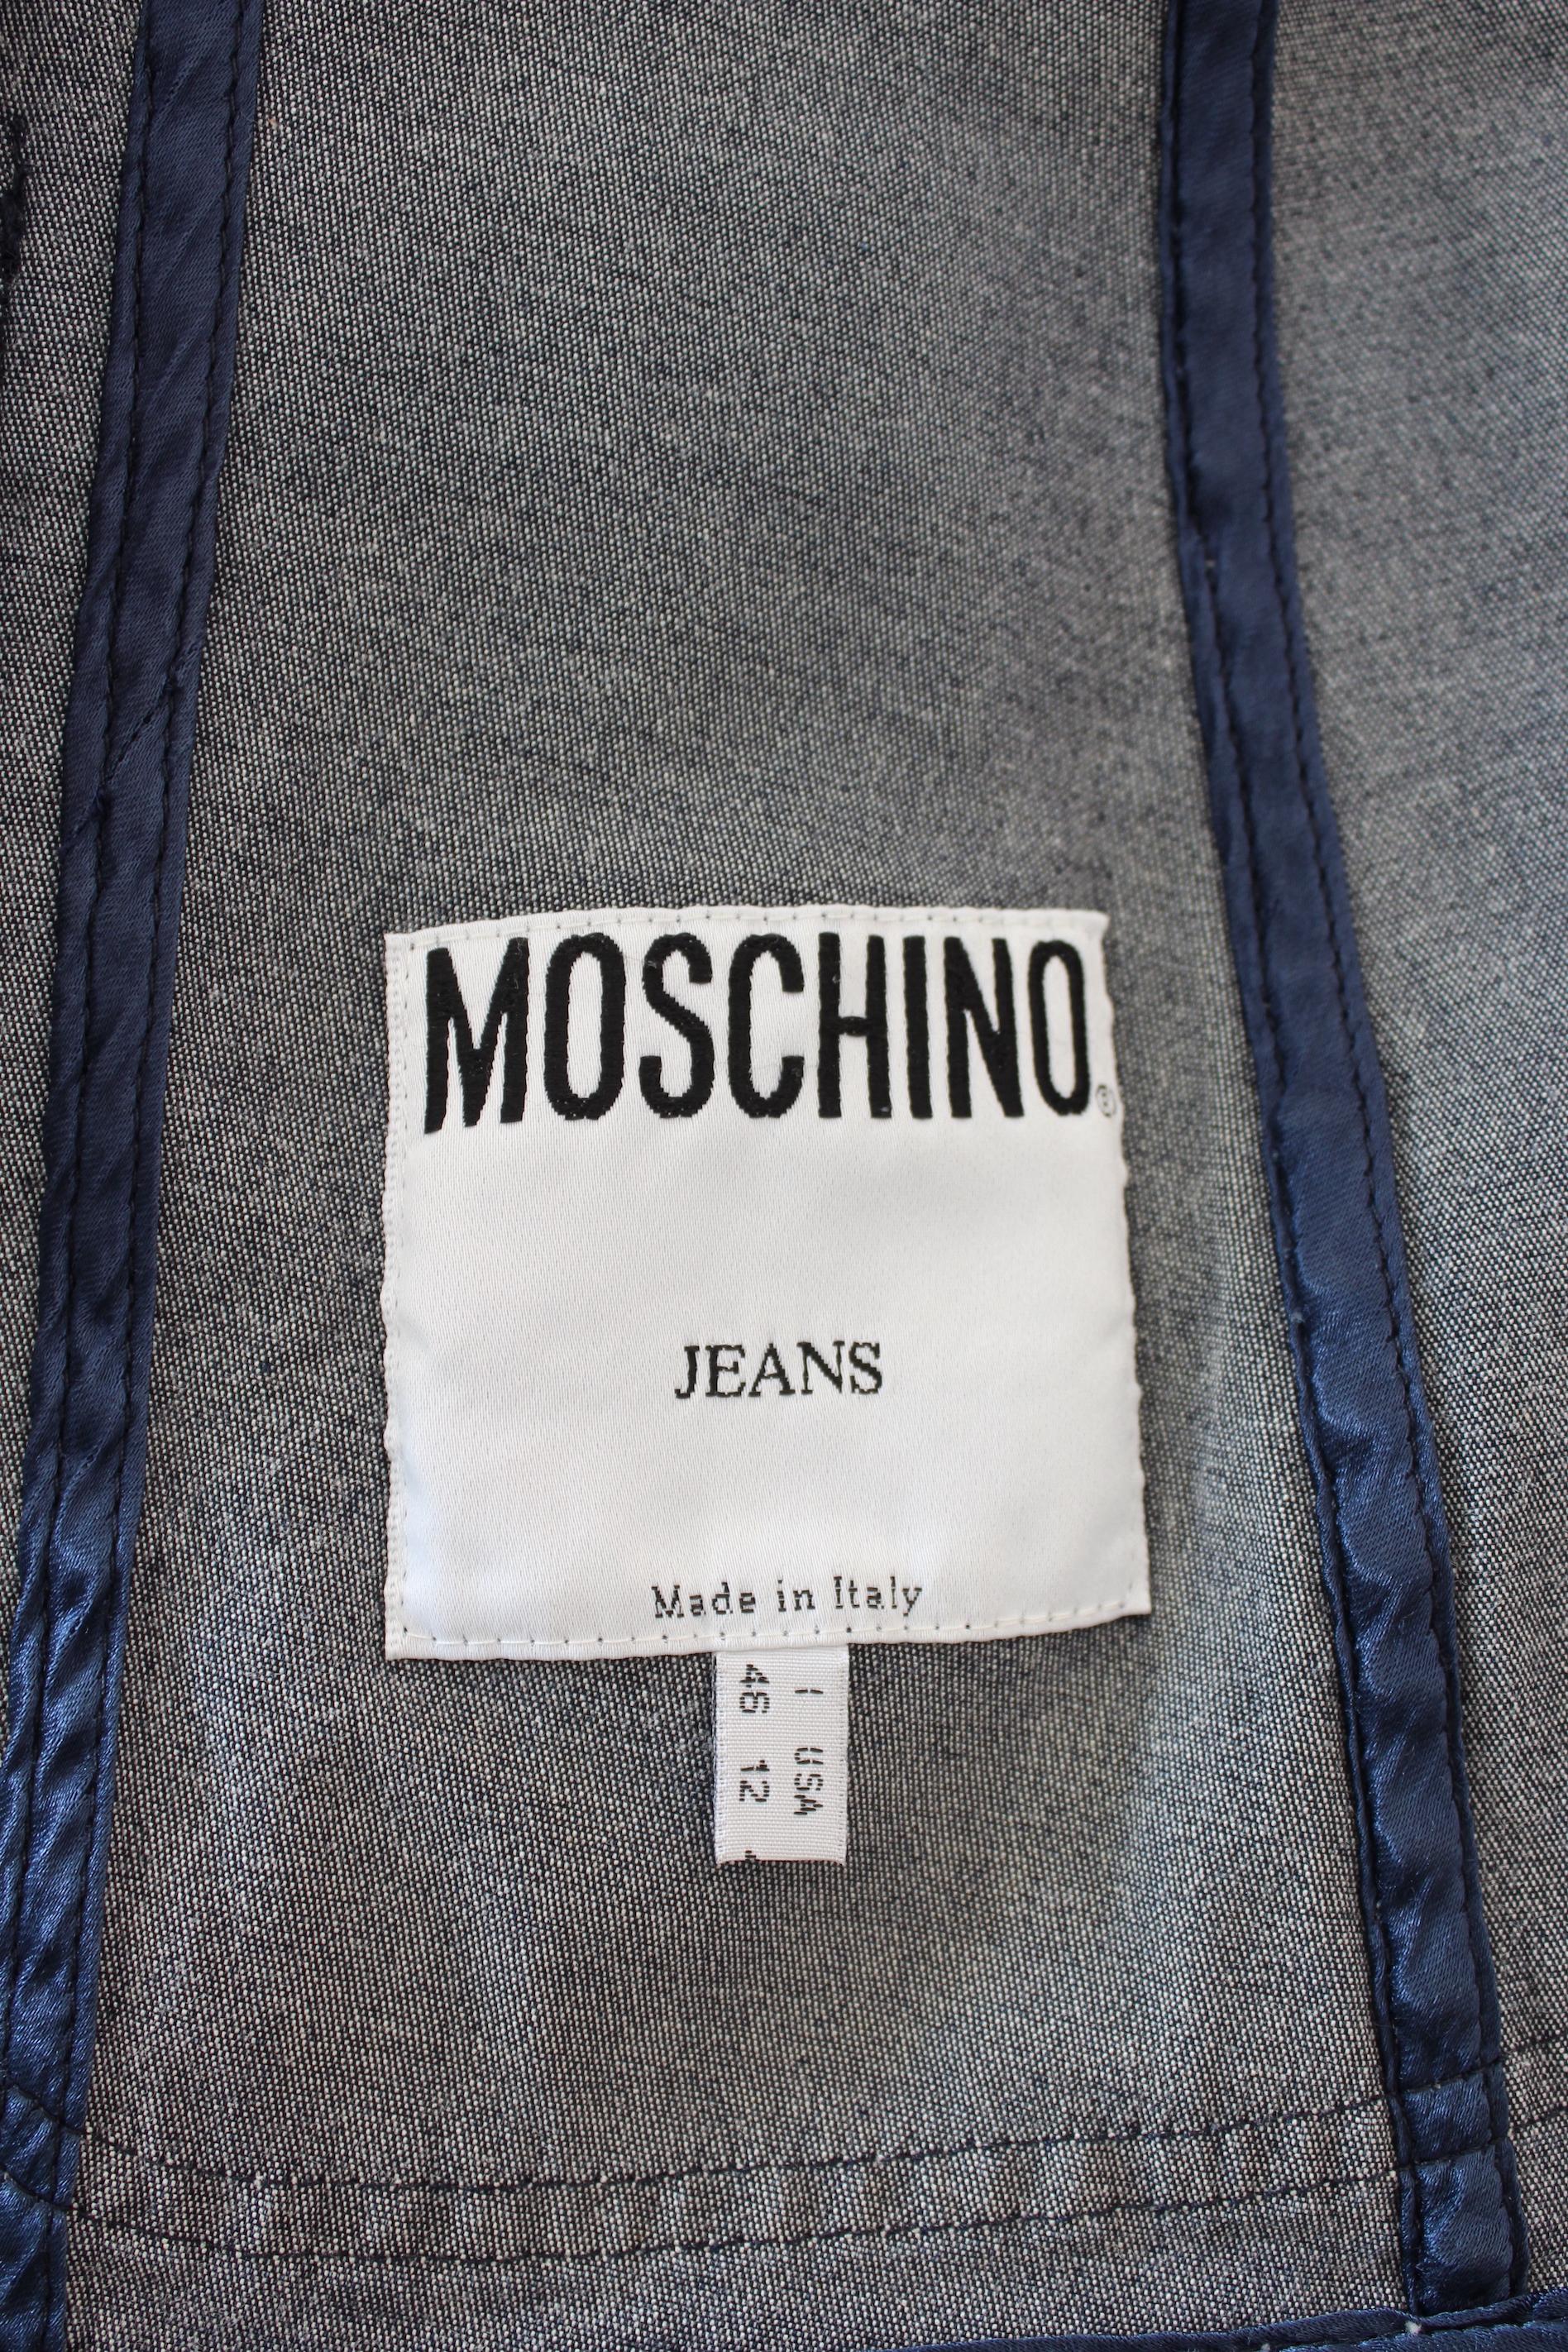 Moschino Blue Cotton Fitted Denim Jacket In Excellent Condition In Brindisi, Bt